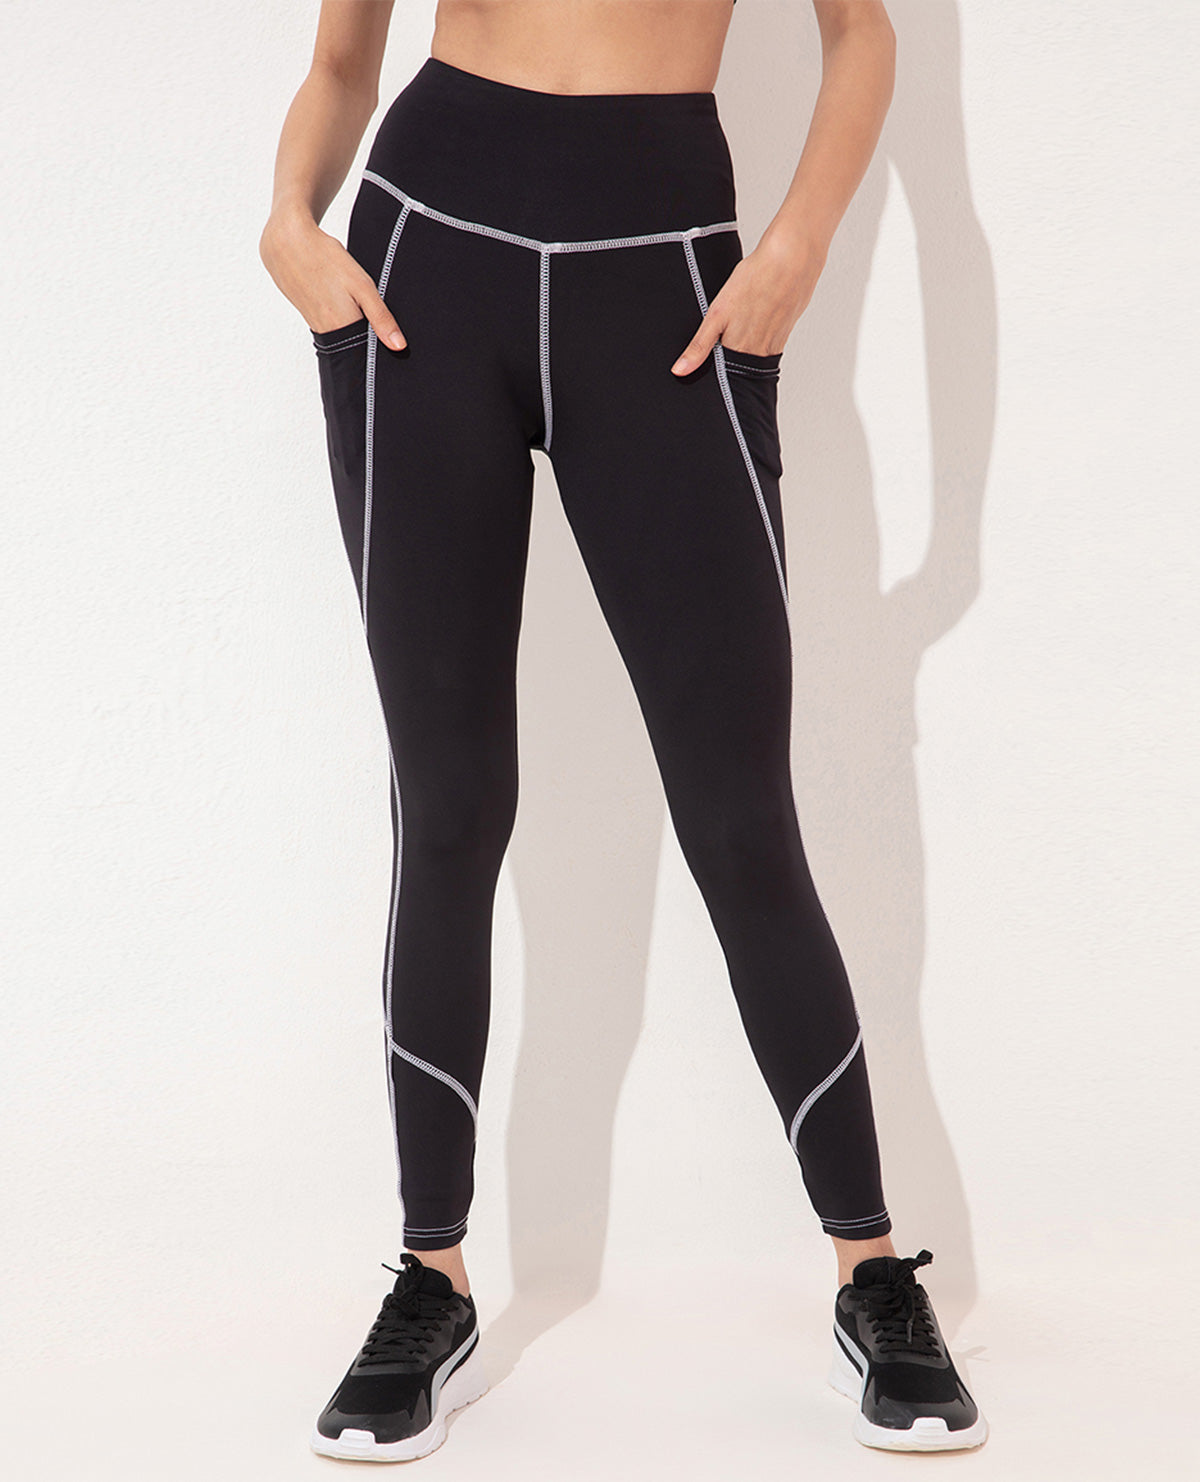 High Waisted leggings in Second SKN Fabric – Kica Active